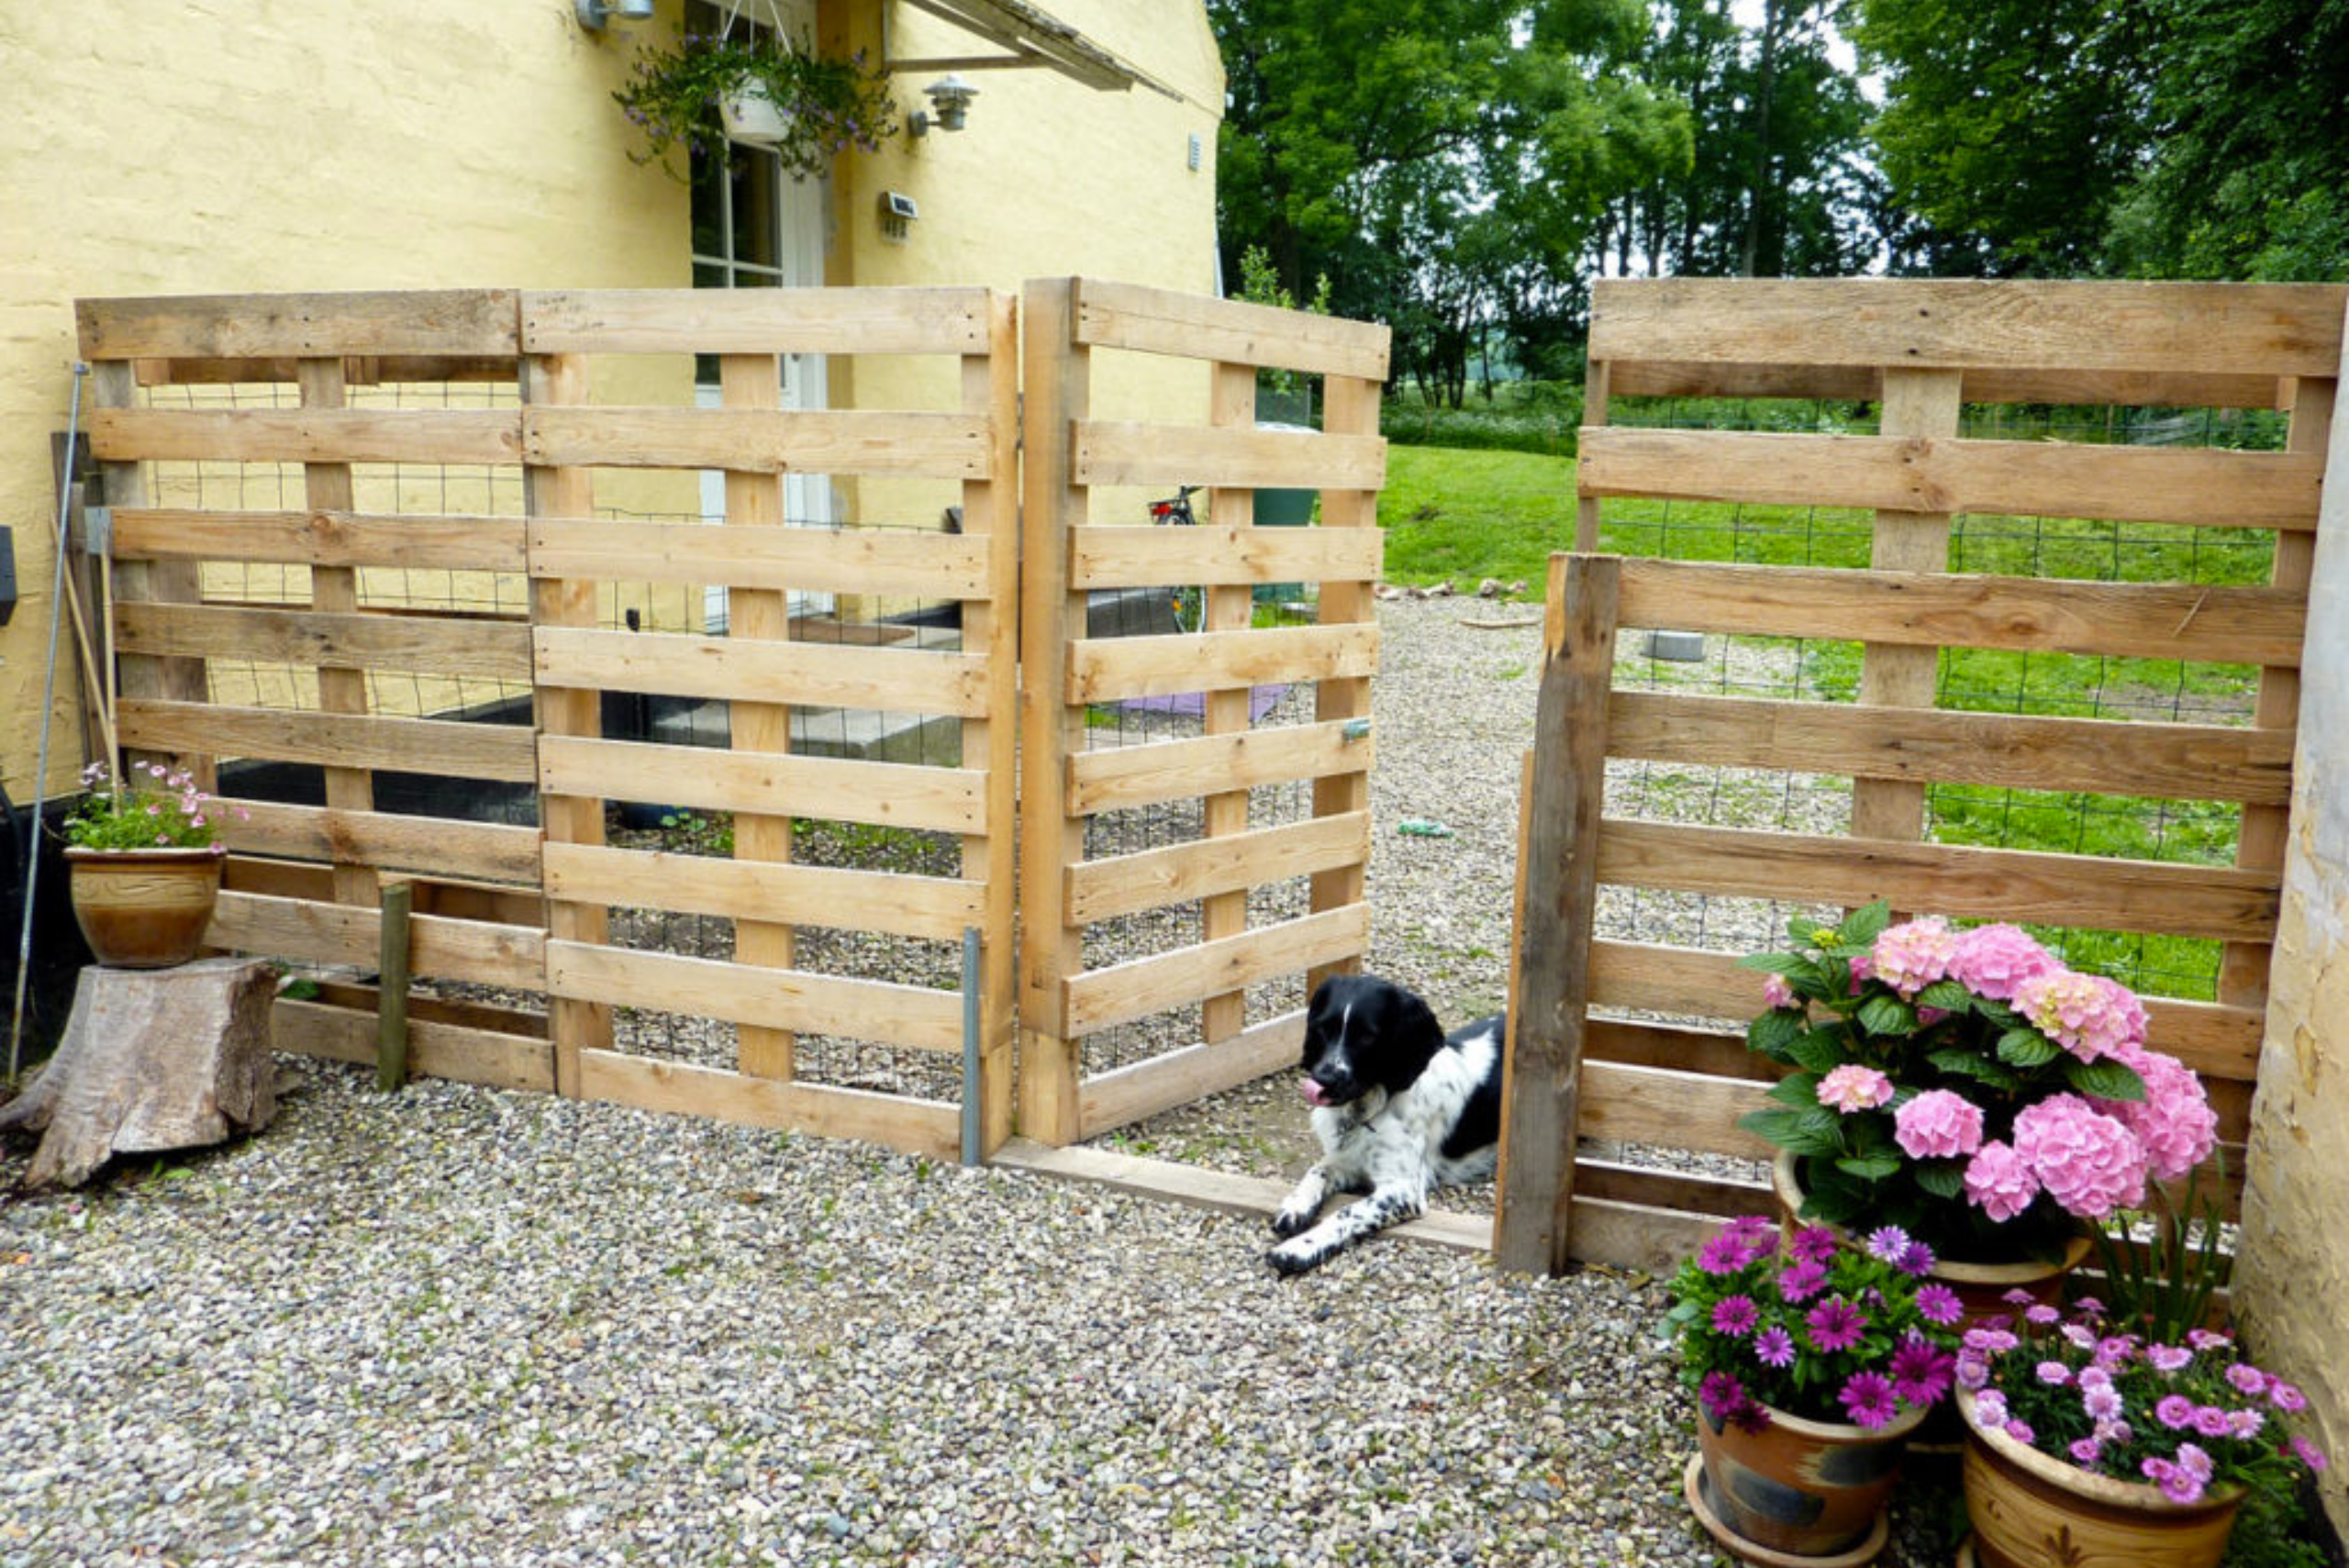 A fence made of pallet wood with open door and dog in the walkway.